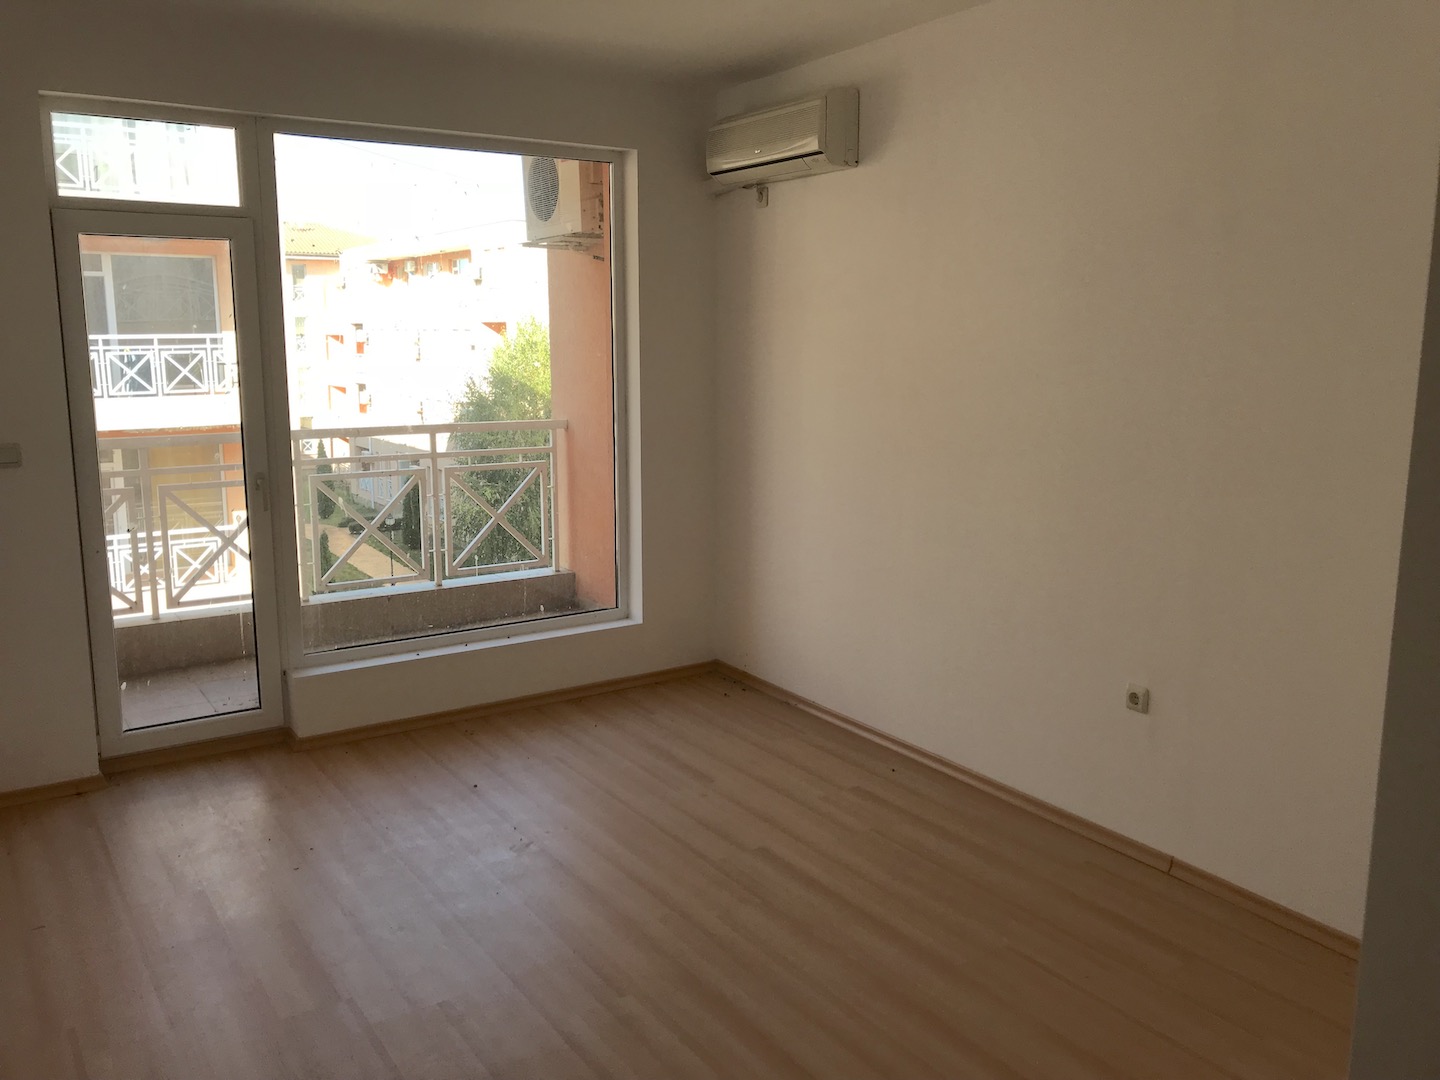 RL-2435 Apartment for Sale in Burgas, Sunny Beach Resort - € 12,500